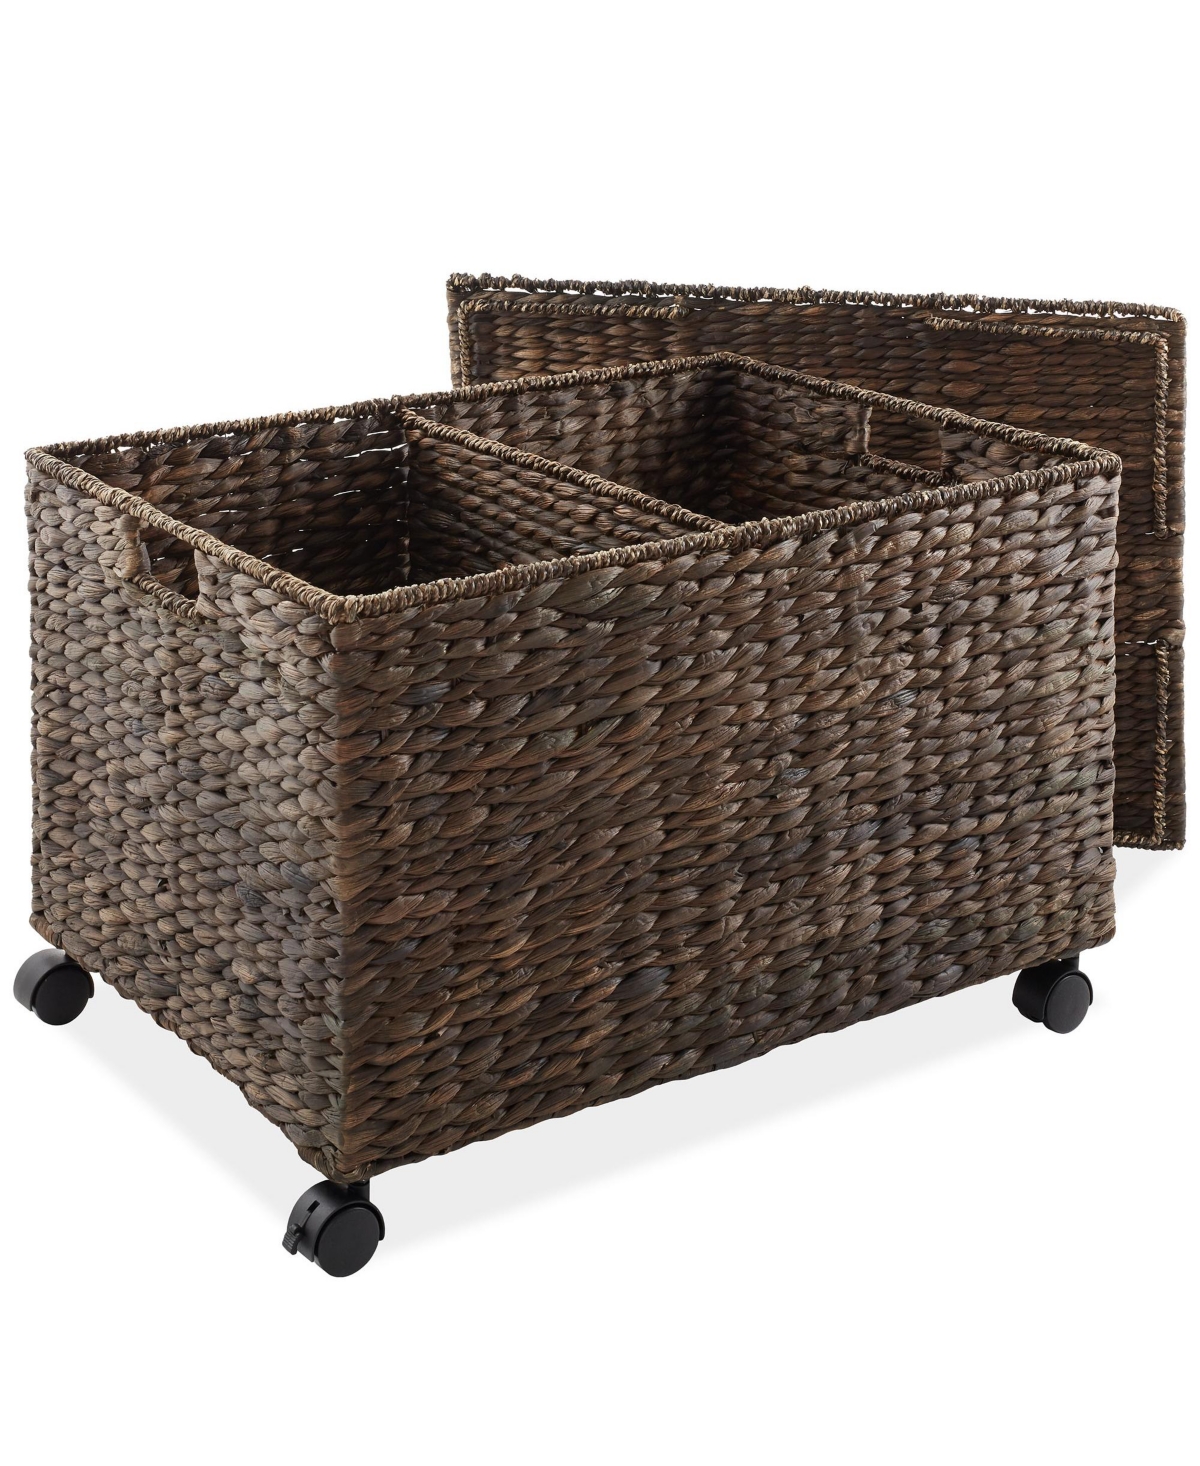 Rolling Storage Basket Cart with Lid and Wheels, Natural - Woven Water Hyacinth Divided Sorting Bin for Kitchen, Pantry, Laundry, Garage - N